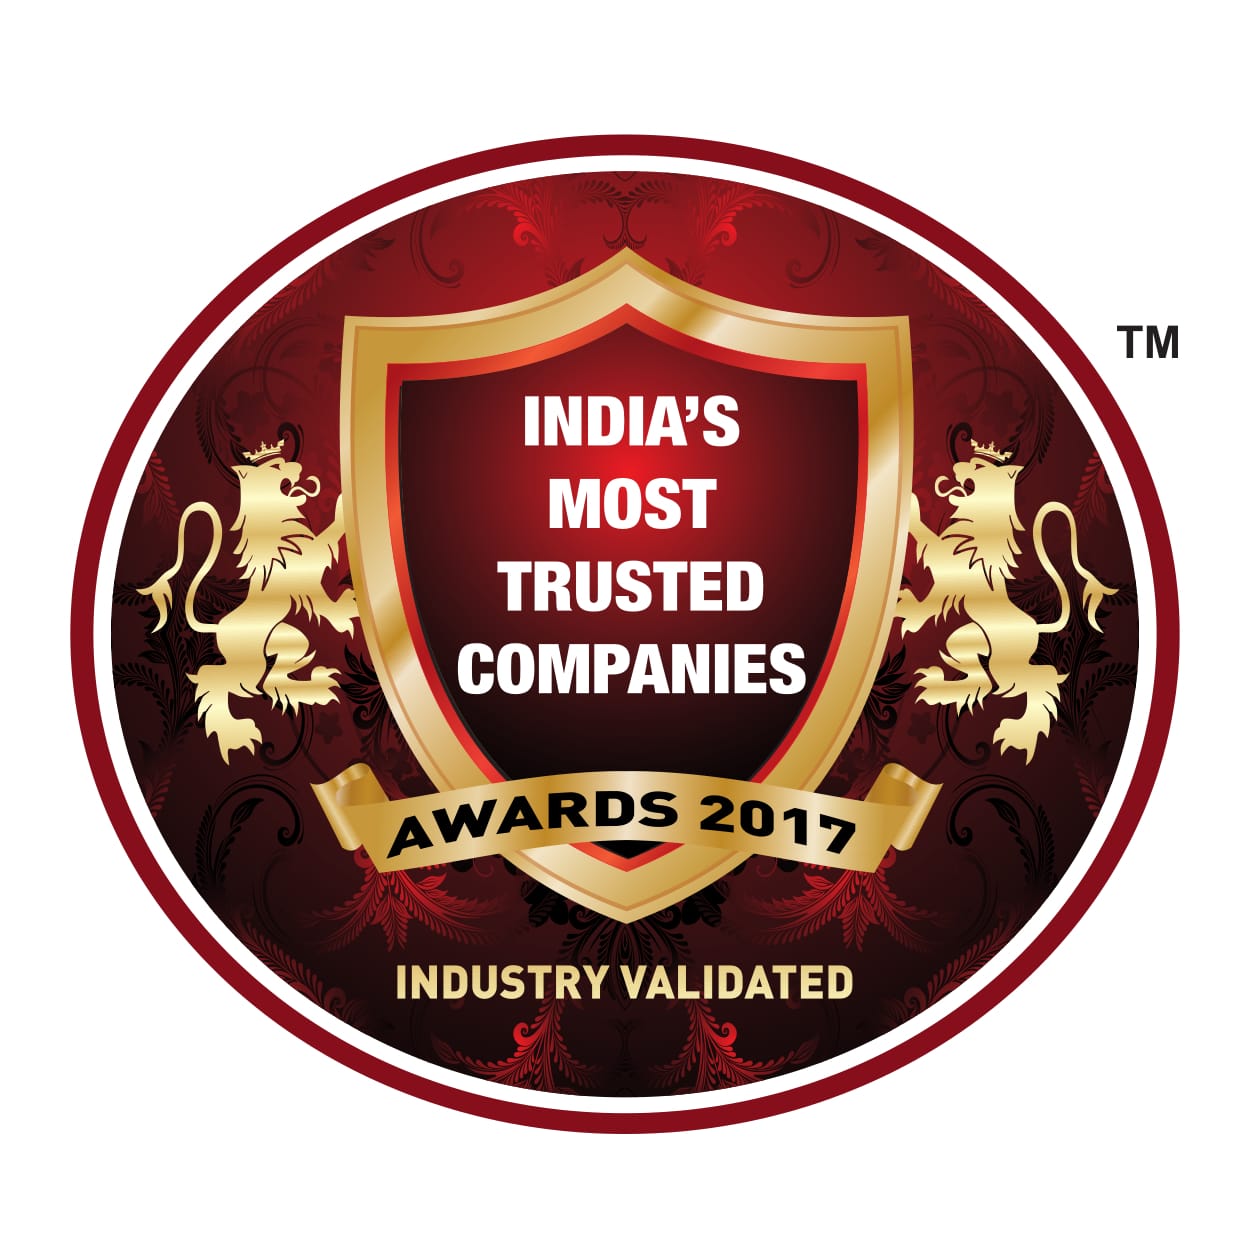 ICCS Wins "India's Most Trusted Companies Awards 2017"